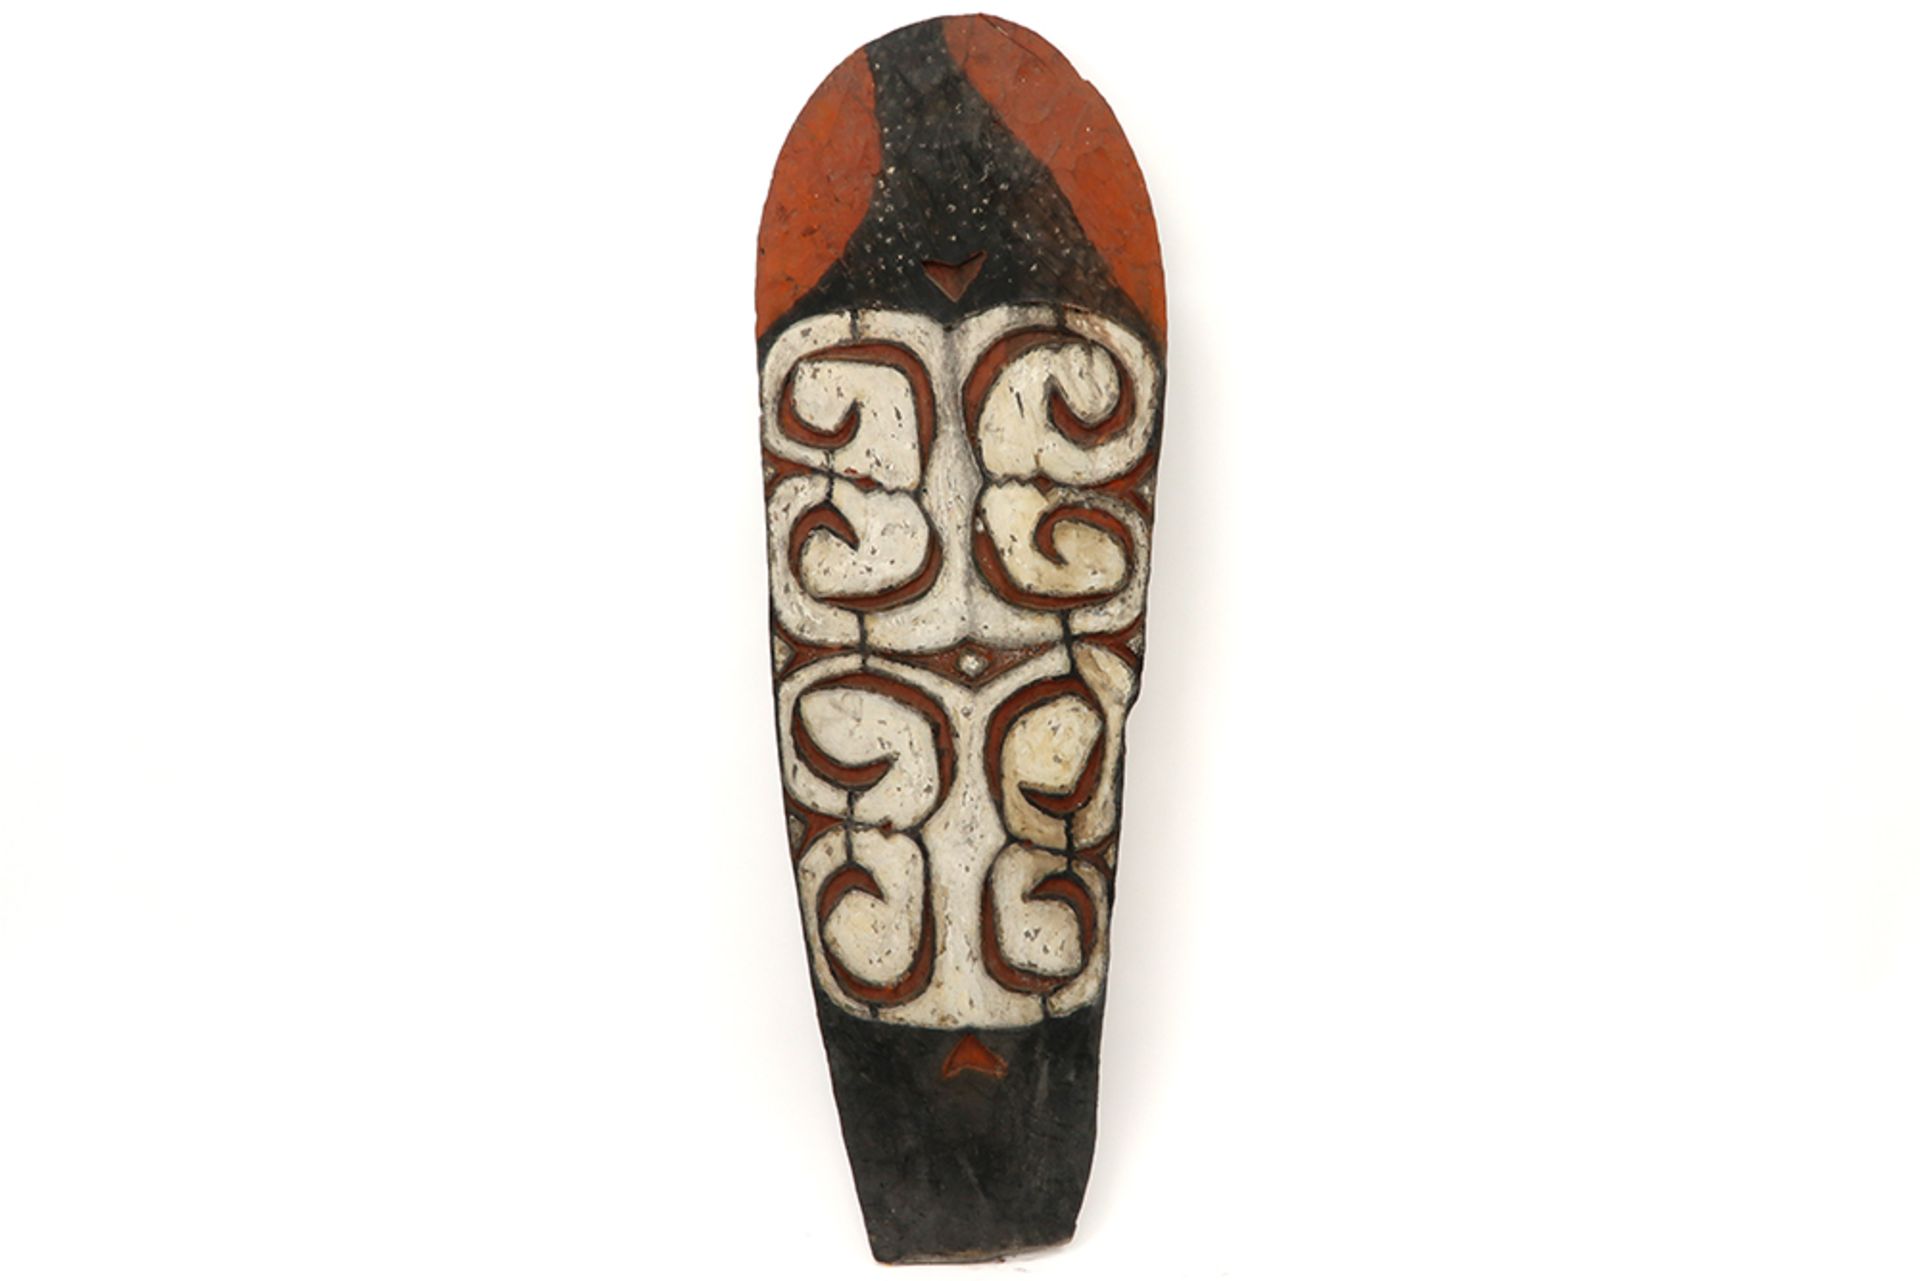 Papua New Guinean Asmat shield in wood with pigment polychromy, typical carvings and a figure on the